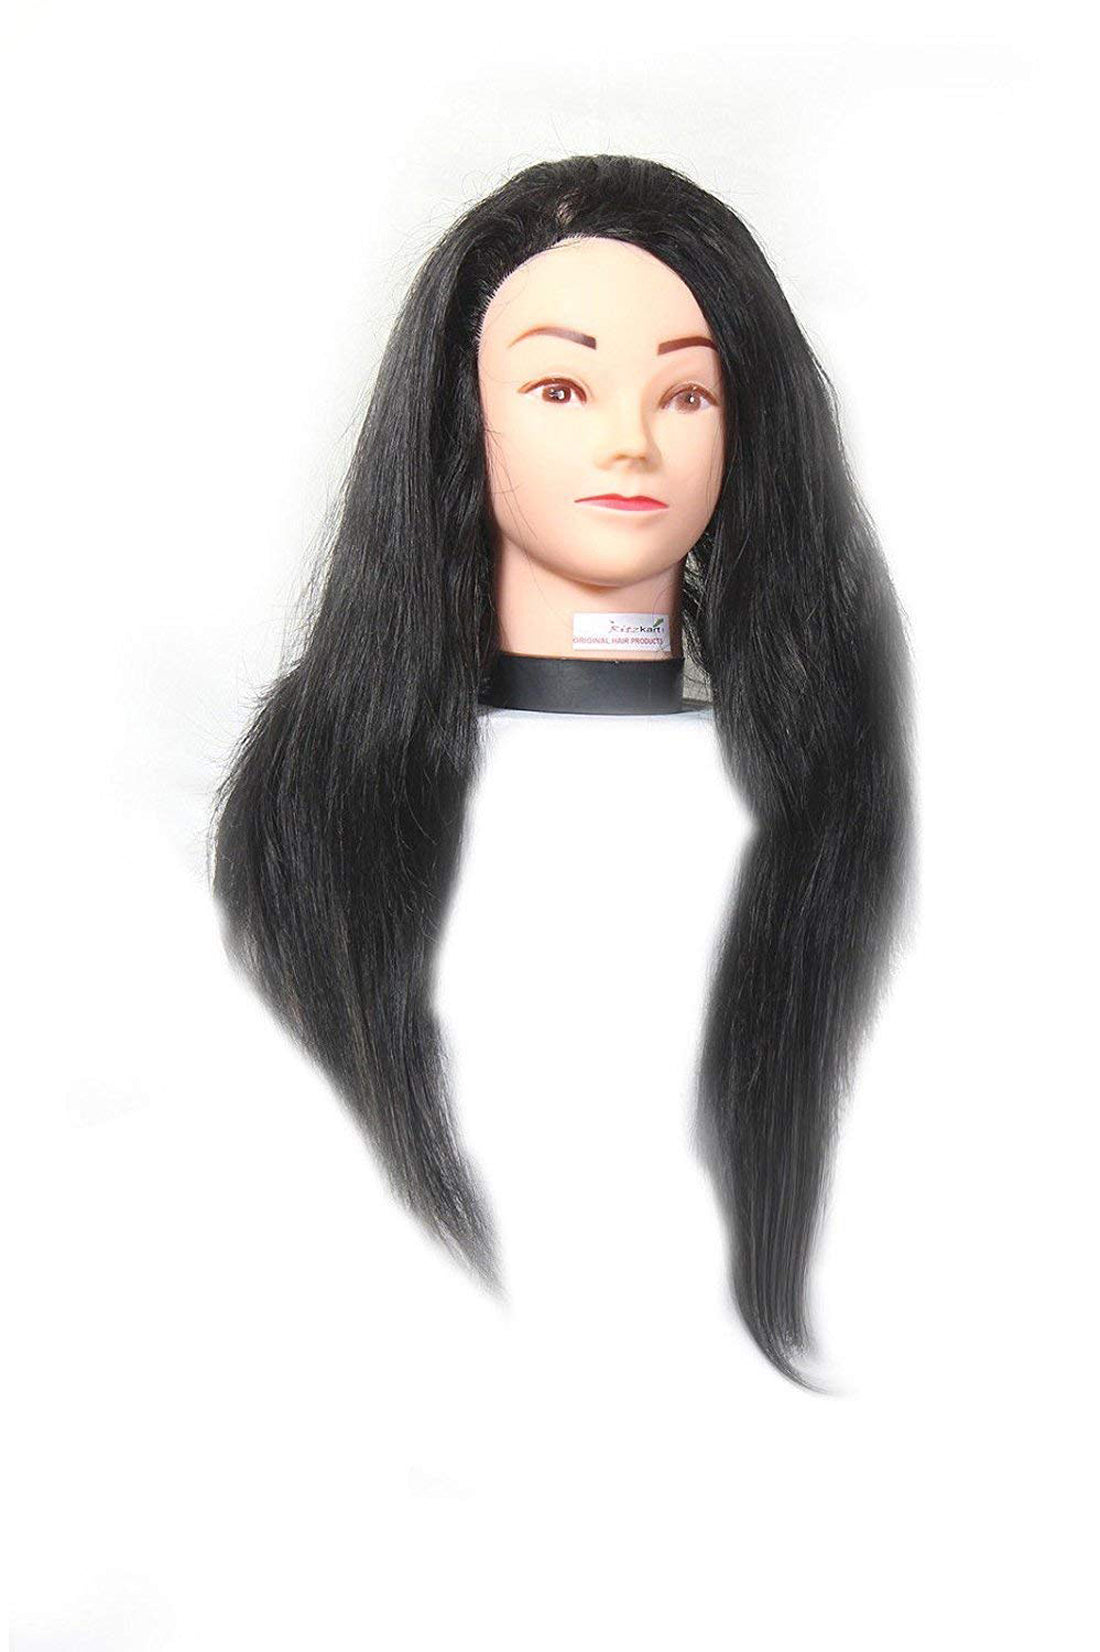 24 inch Long Black Synthetic Hair Beginners dummy For Styling / Cutting